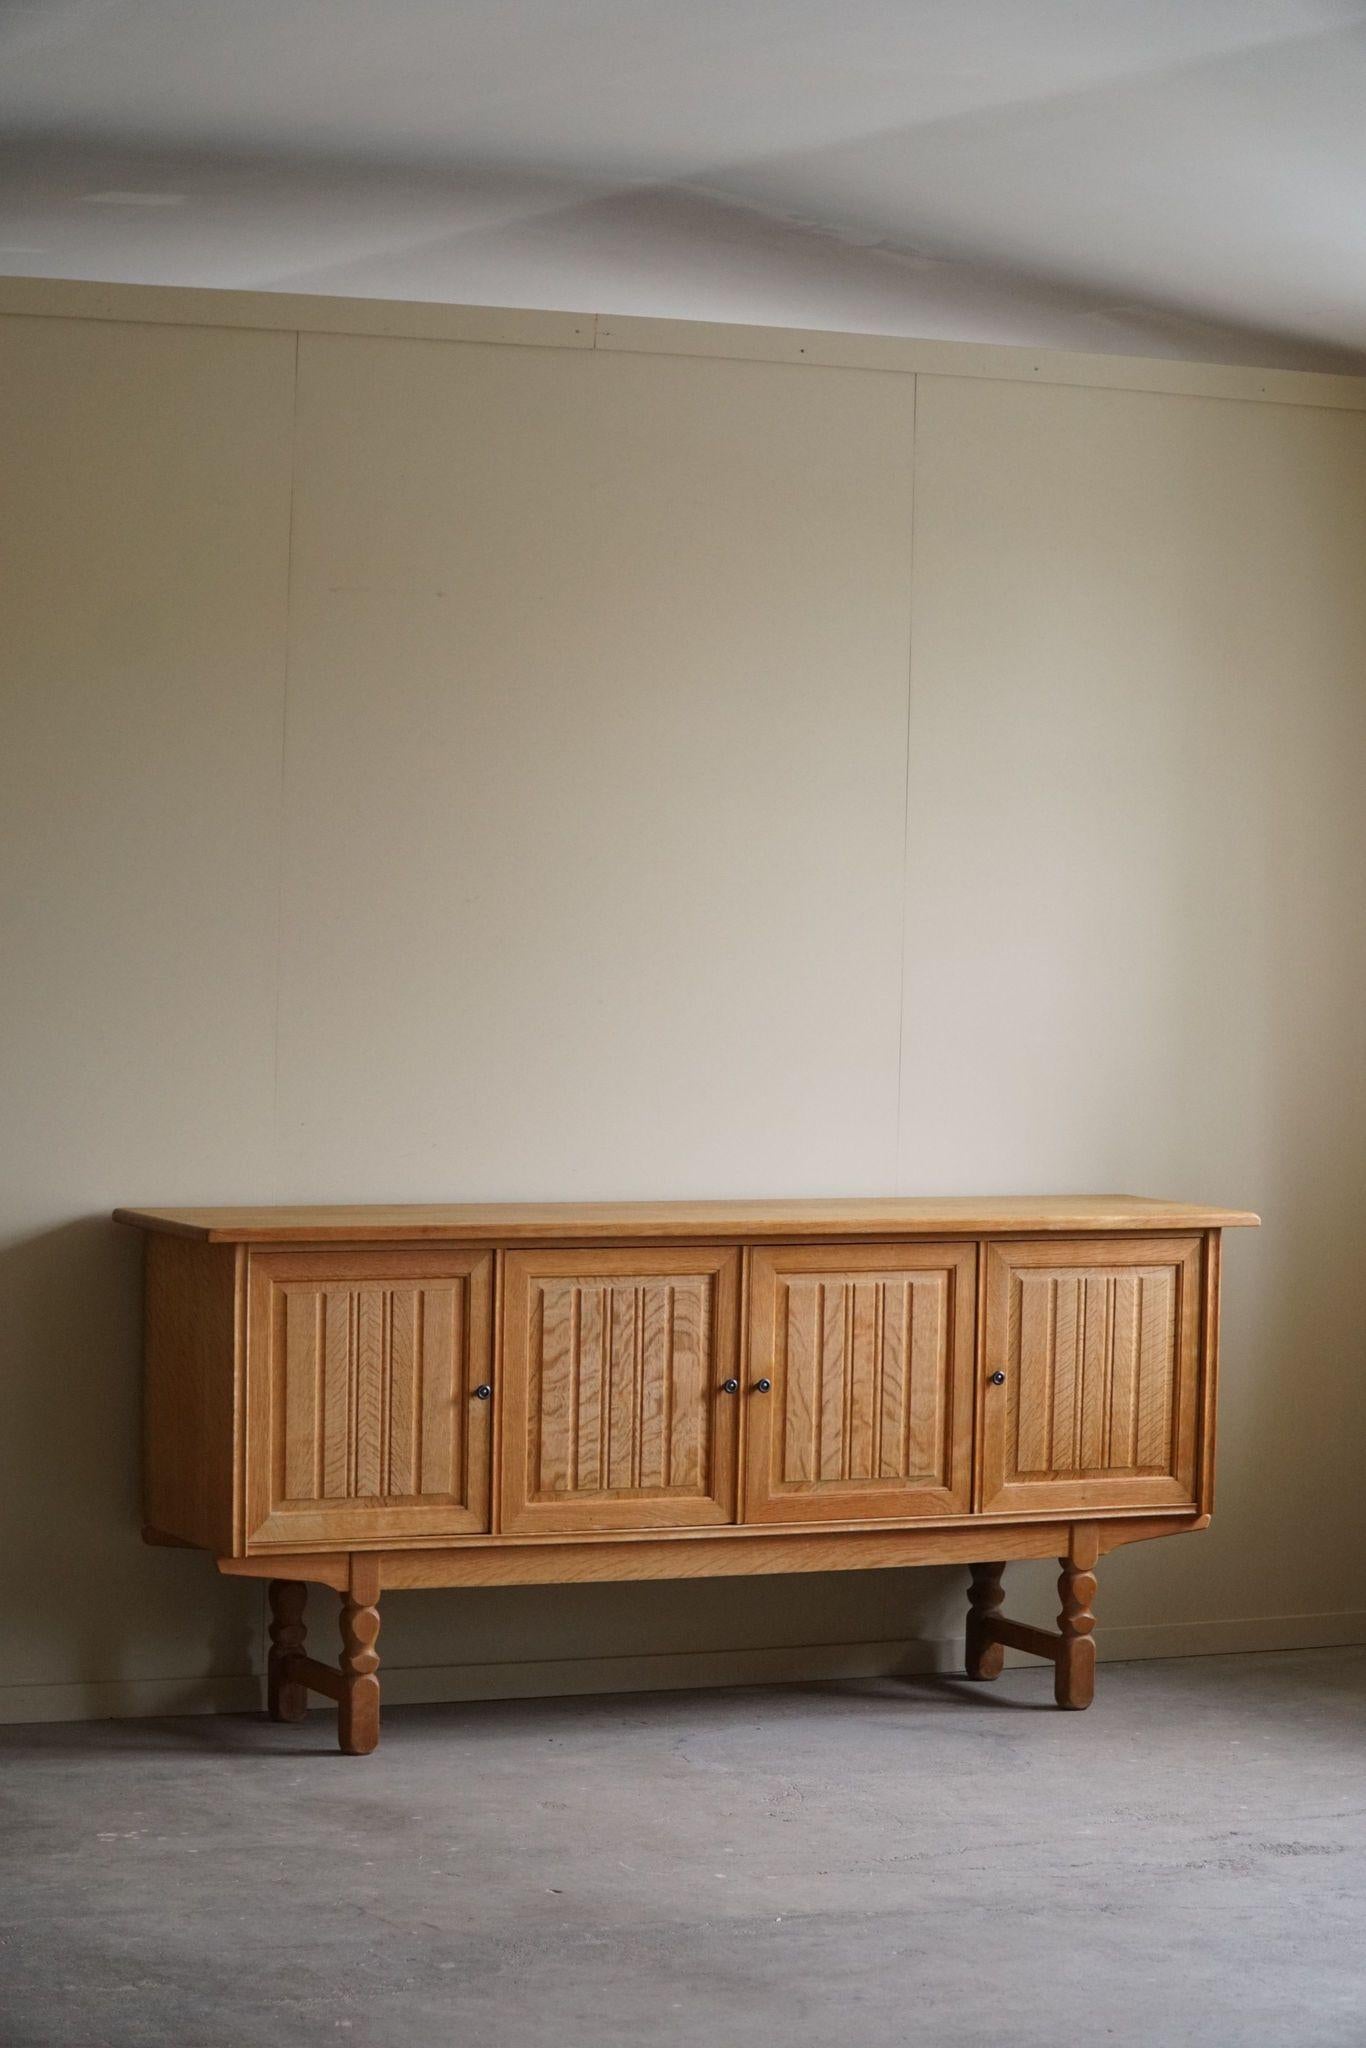 A classic rectangular sideboard / cabinet in oak with great storage space and a refined carved front design. Made by a Danish cabinetmaker in the 1960s.
This piece is in a good vintage condition. 

This intriguing brutalist sideboard will complement